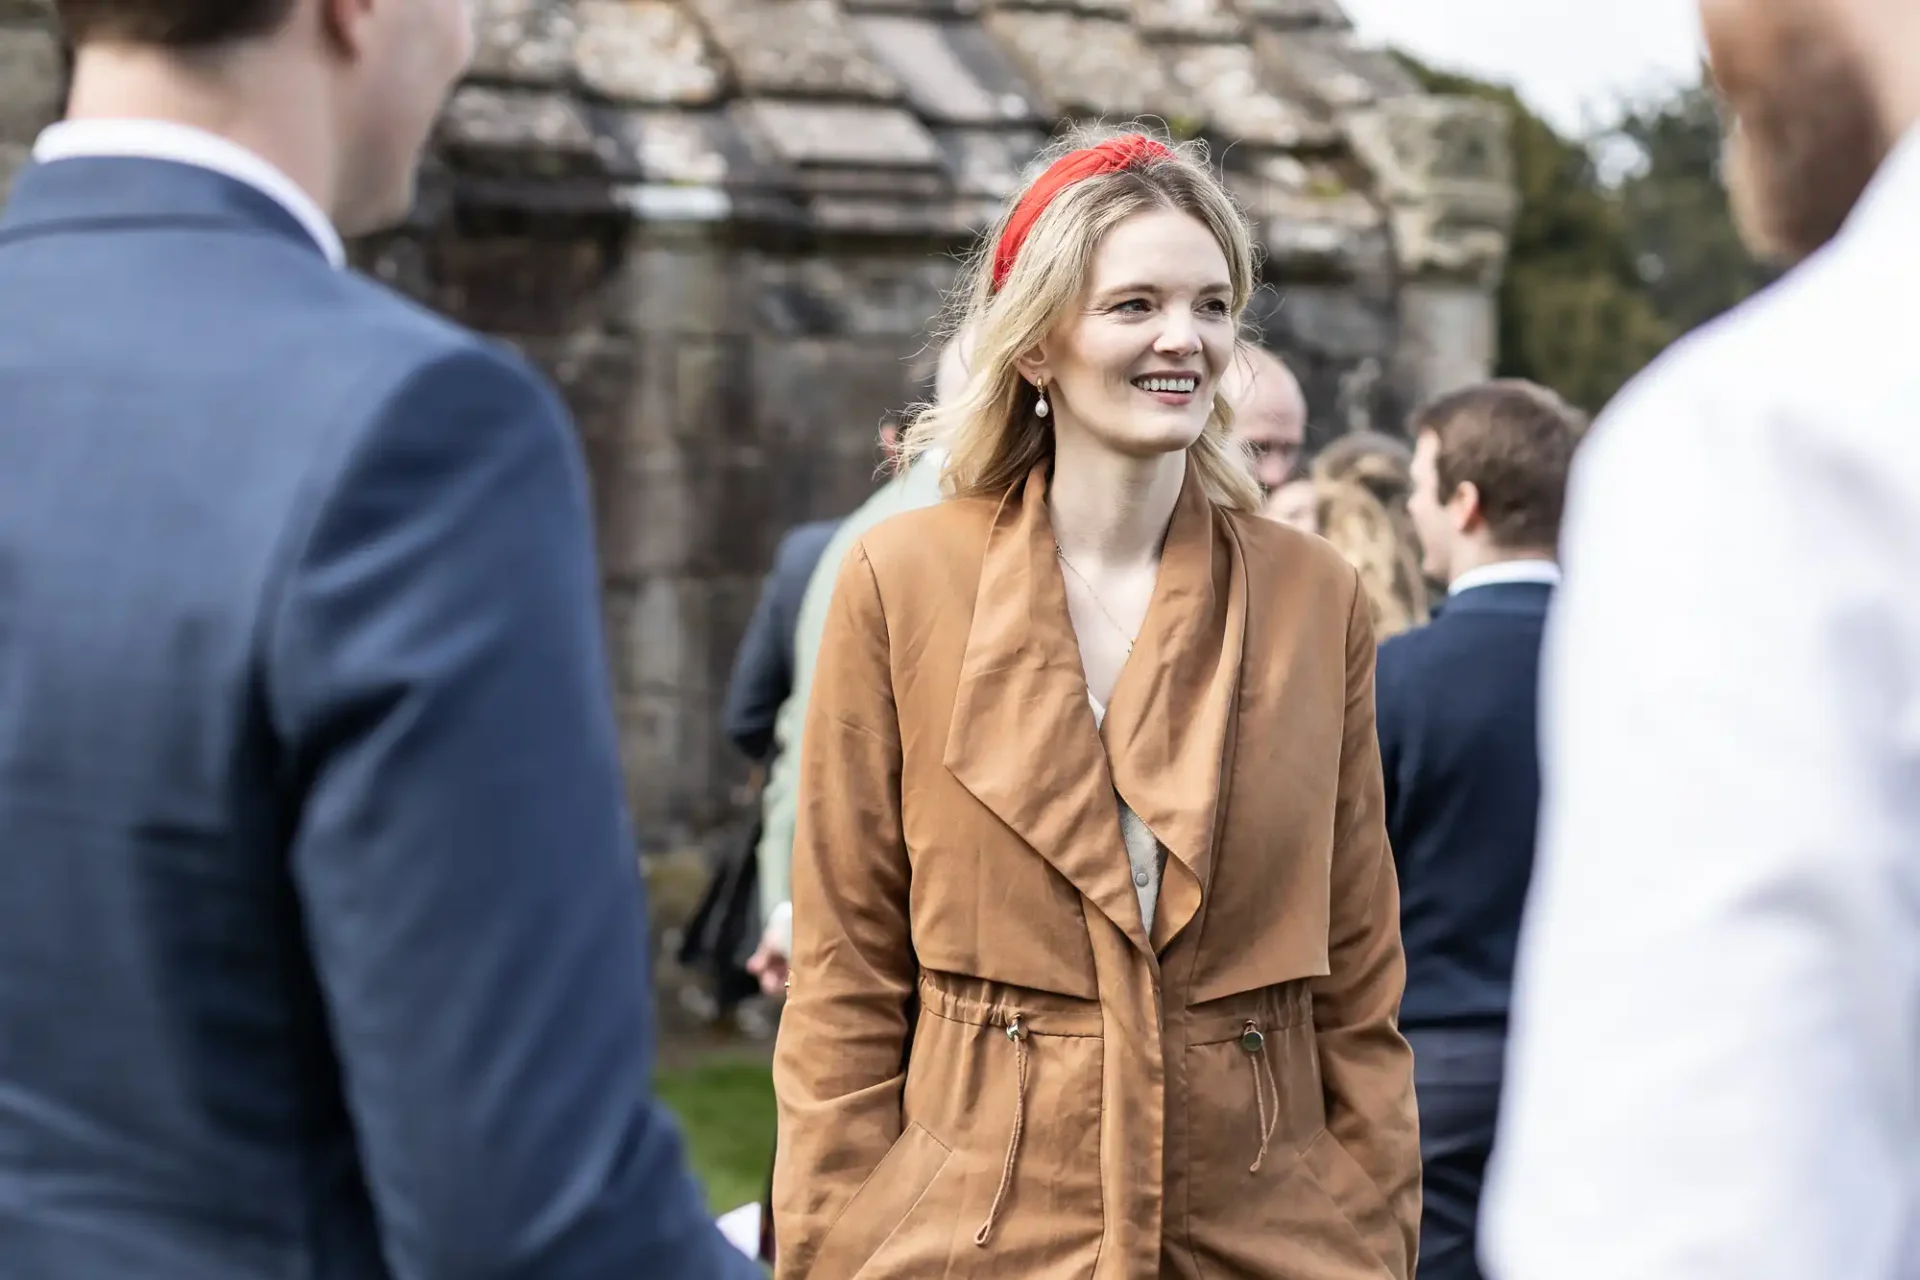 A woman wearing a brown coat and red headband smiles while standing among a group of people outdoors.